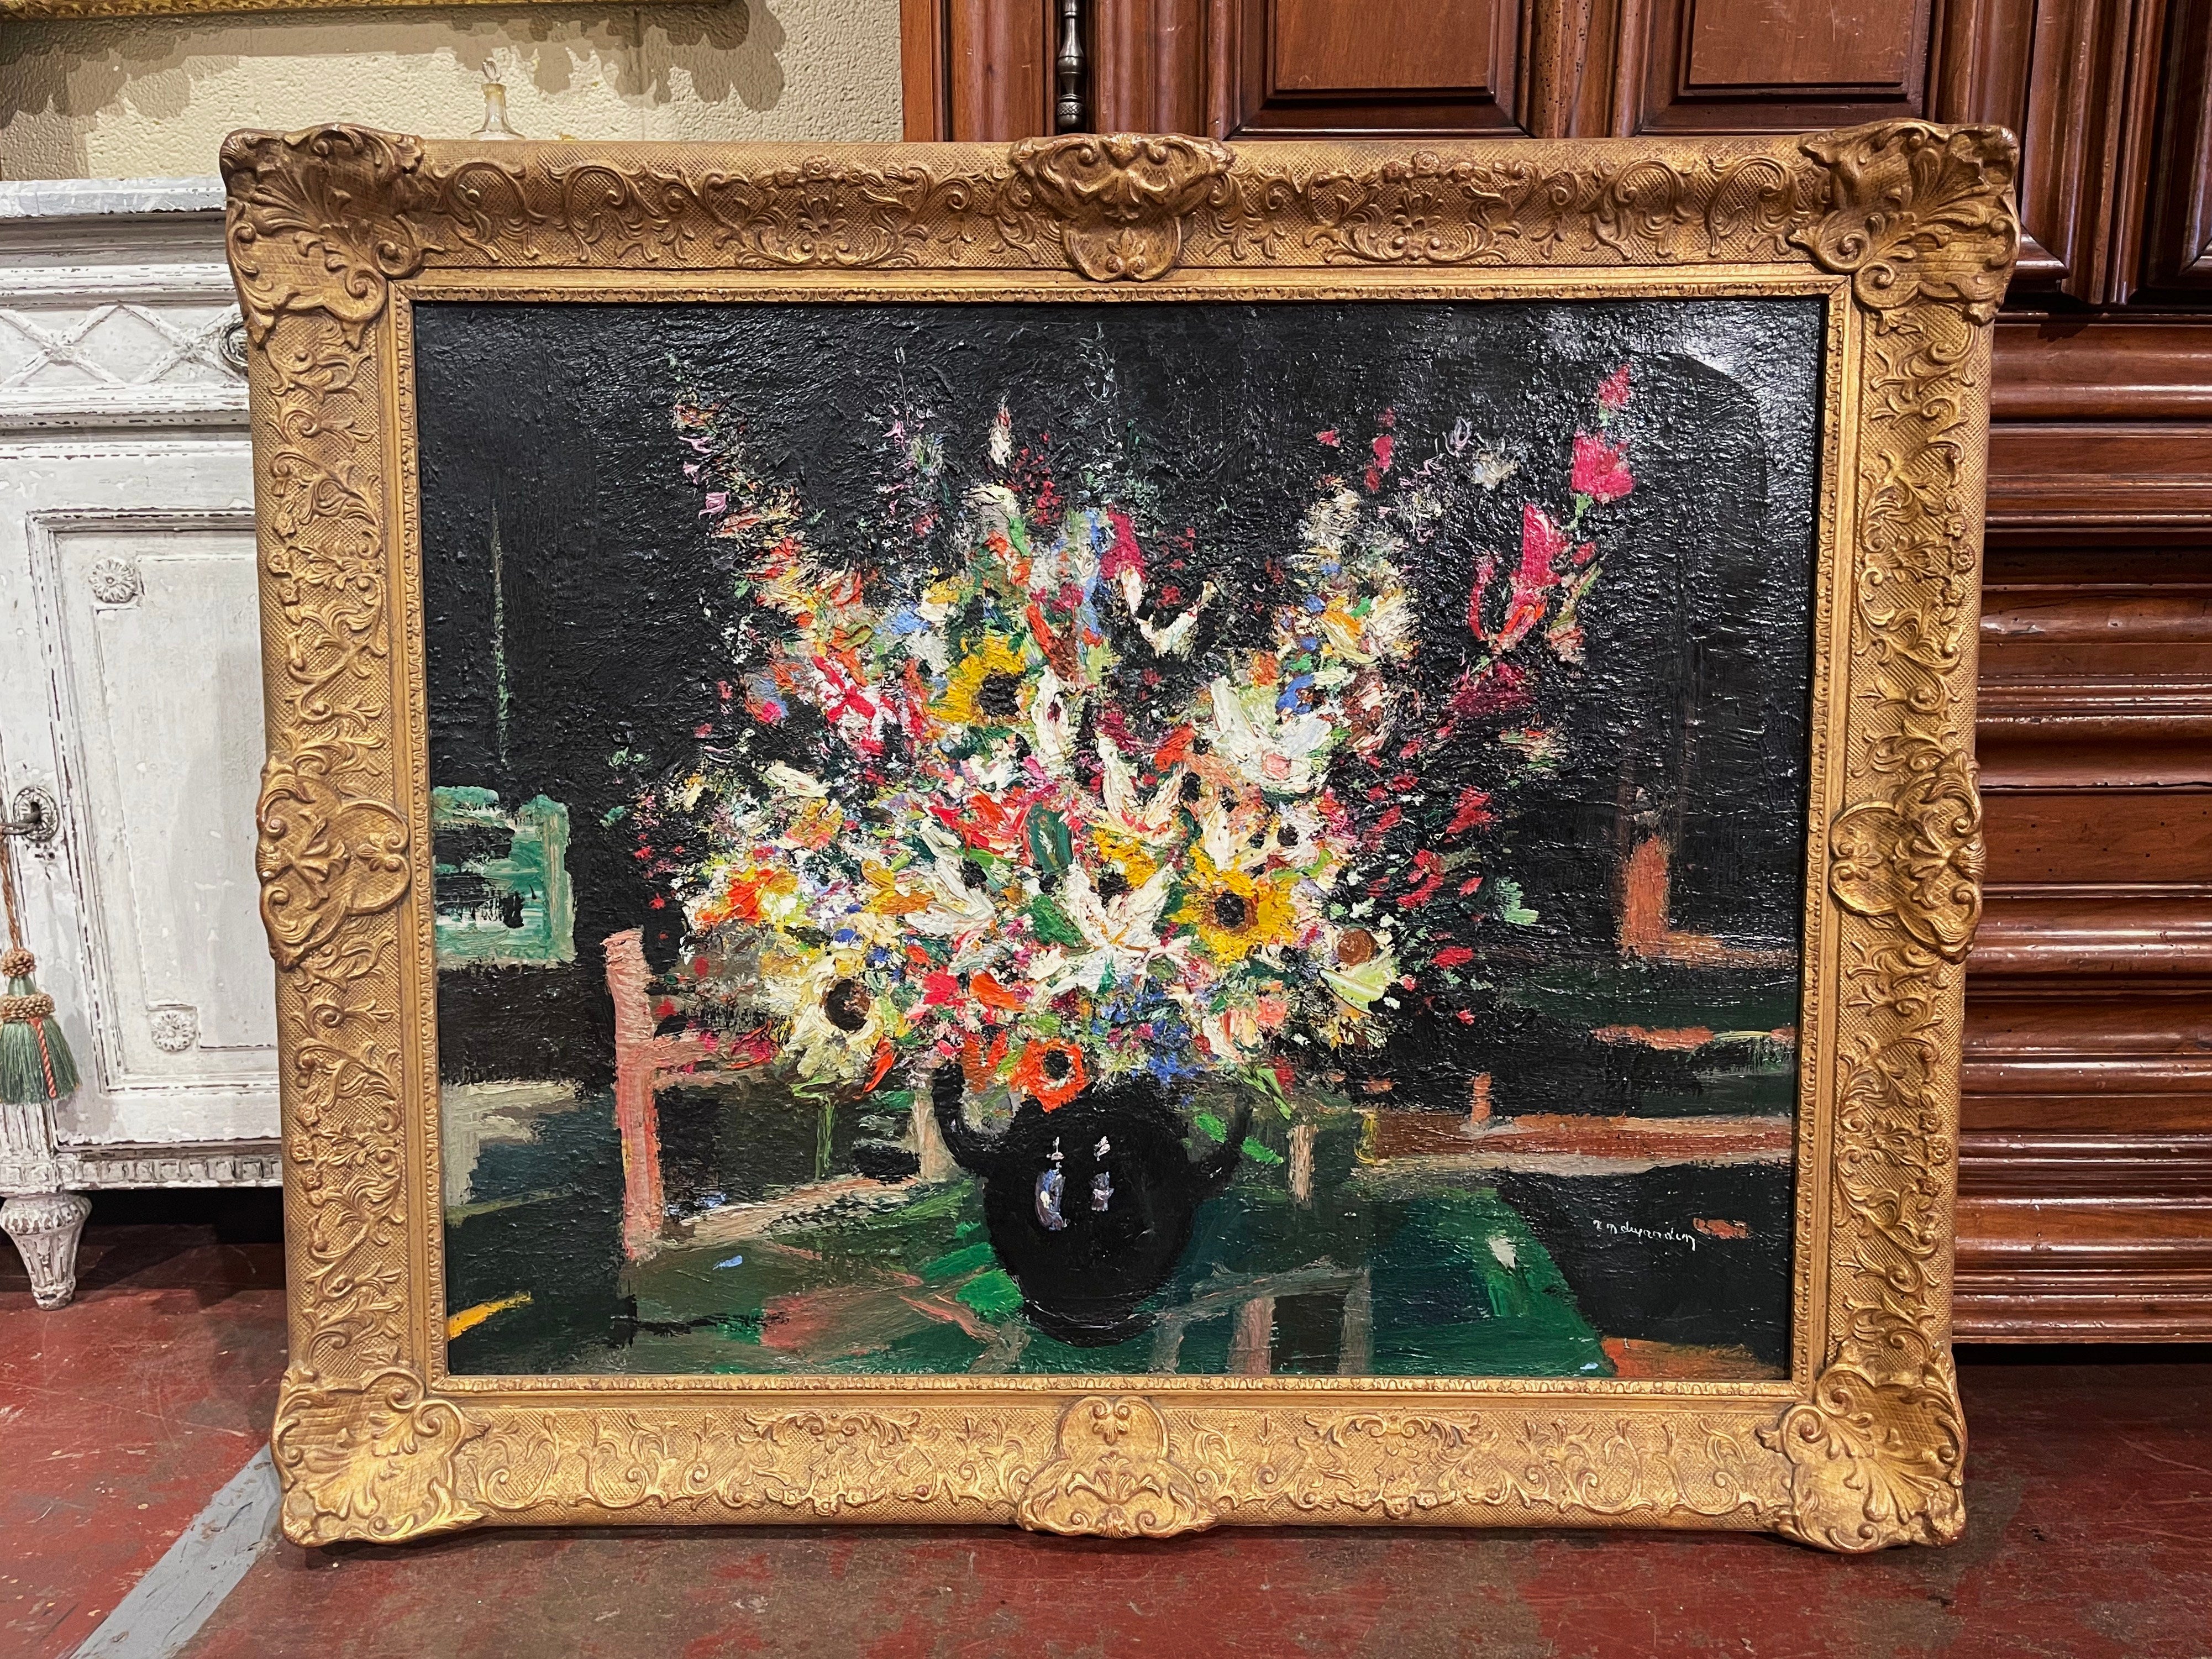 Invite color and life into your home with this large antique still life painting on canvas. Set in the original carved gilt wood frame, and signed by the artist 